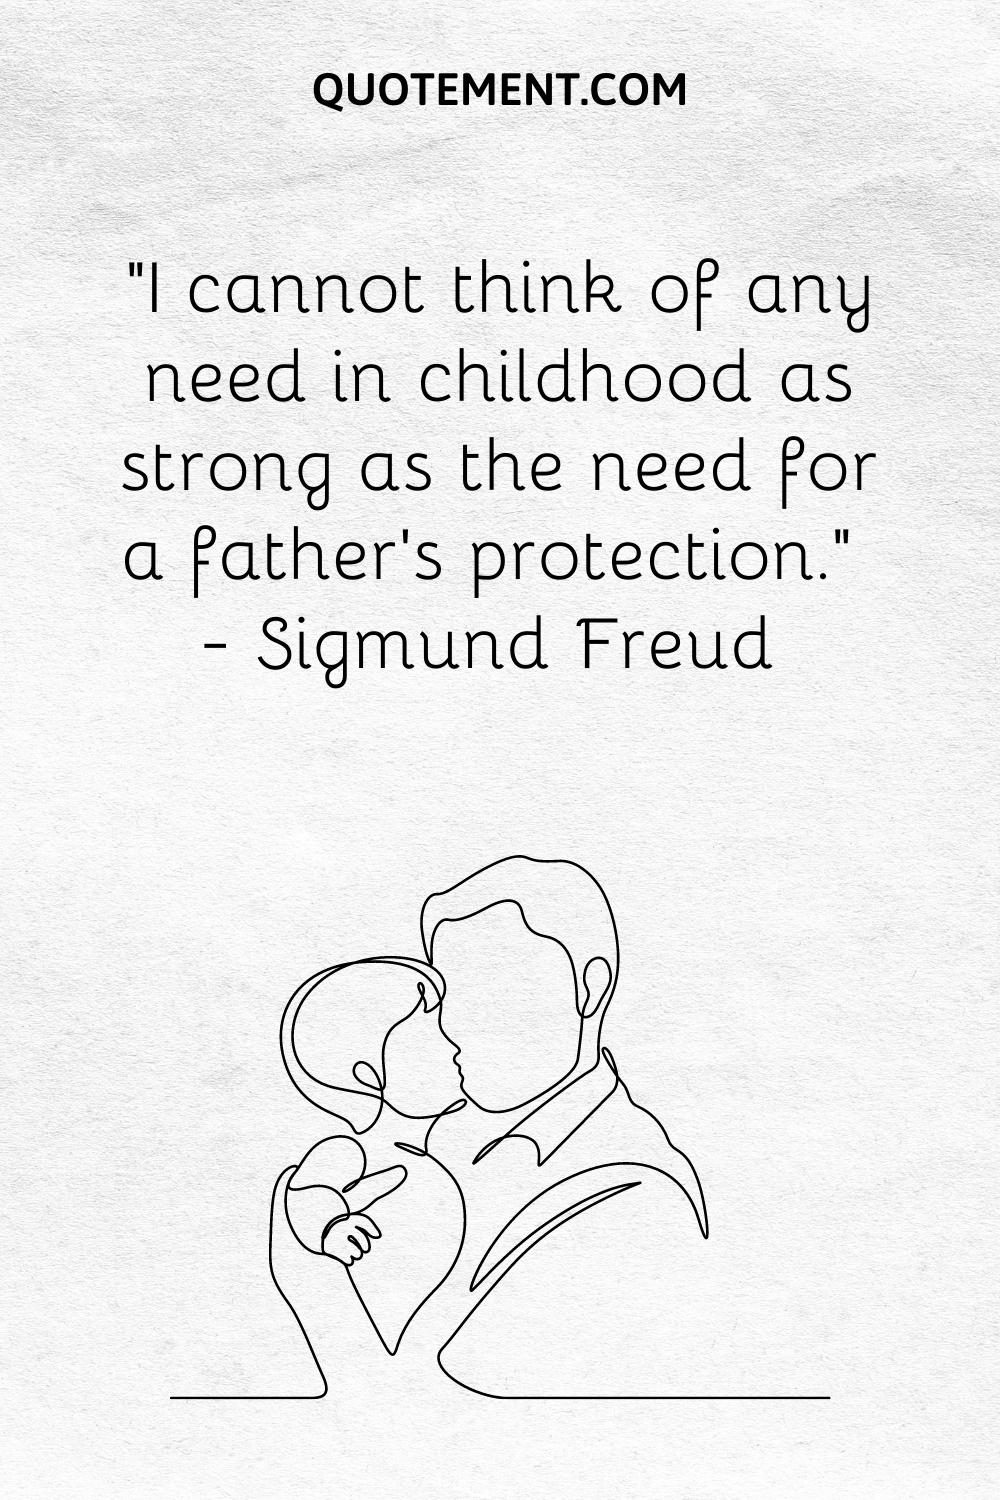 “I cannot think of any need in childhood as strong as the need for a father’s protection.” — Sigmund Freud